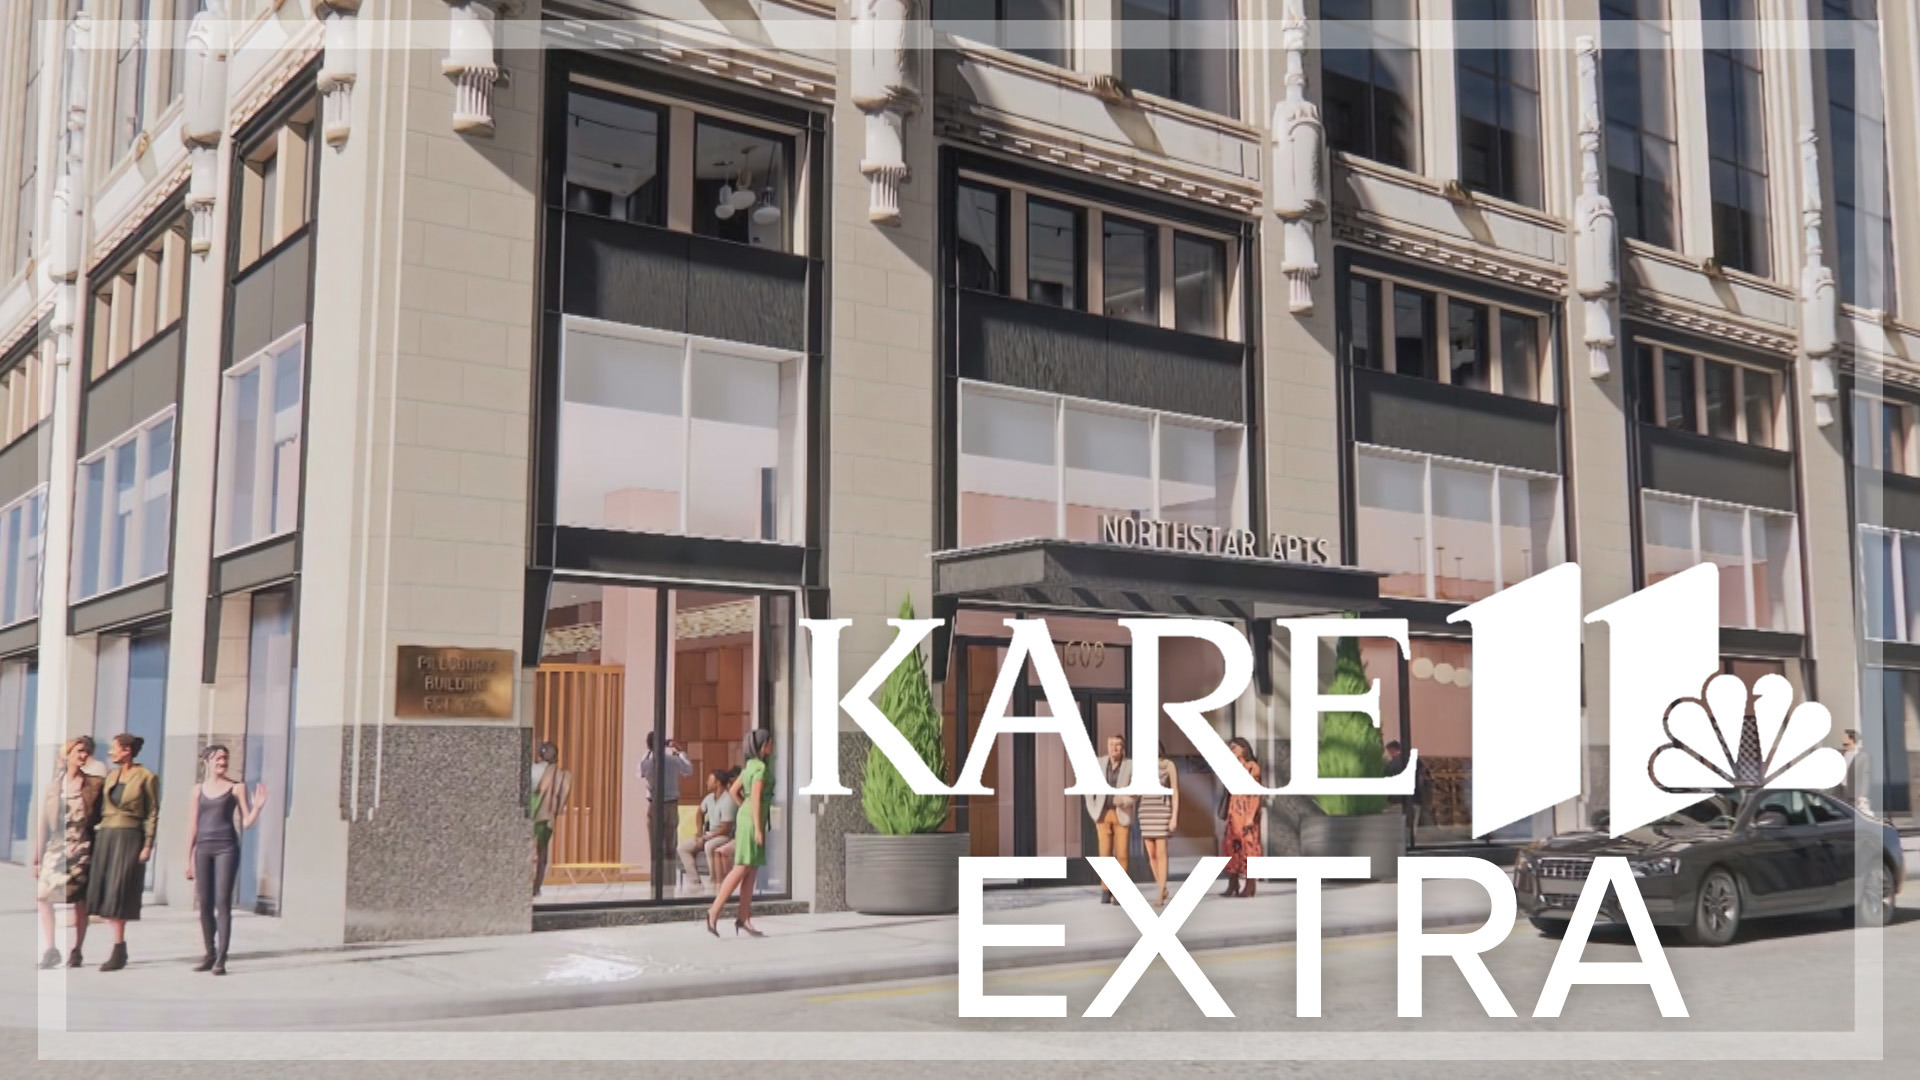 KARE 11 toured two (of only three) downtown Twin Cities projects that are transforming abandoned offices into apartments.